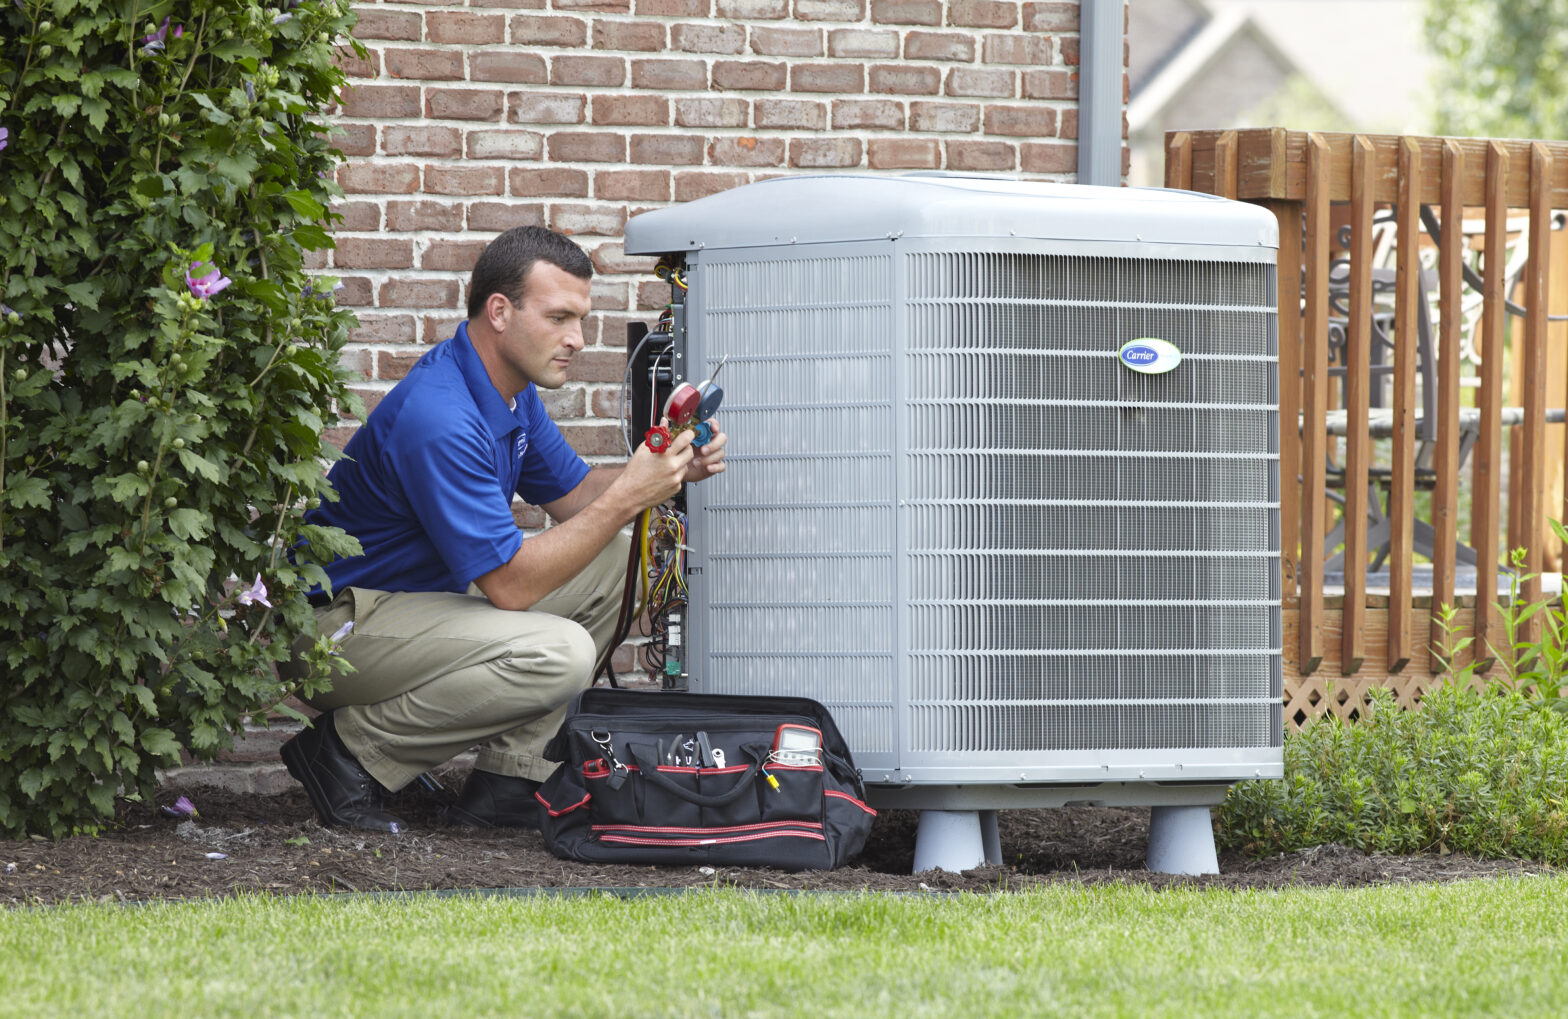 Heat pumps can cut energy use by 50%.